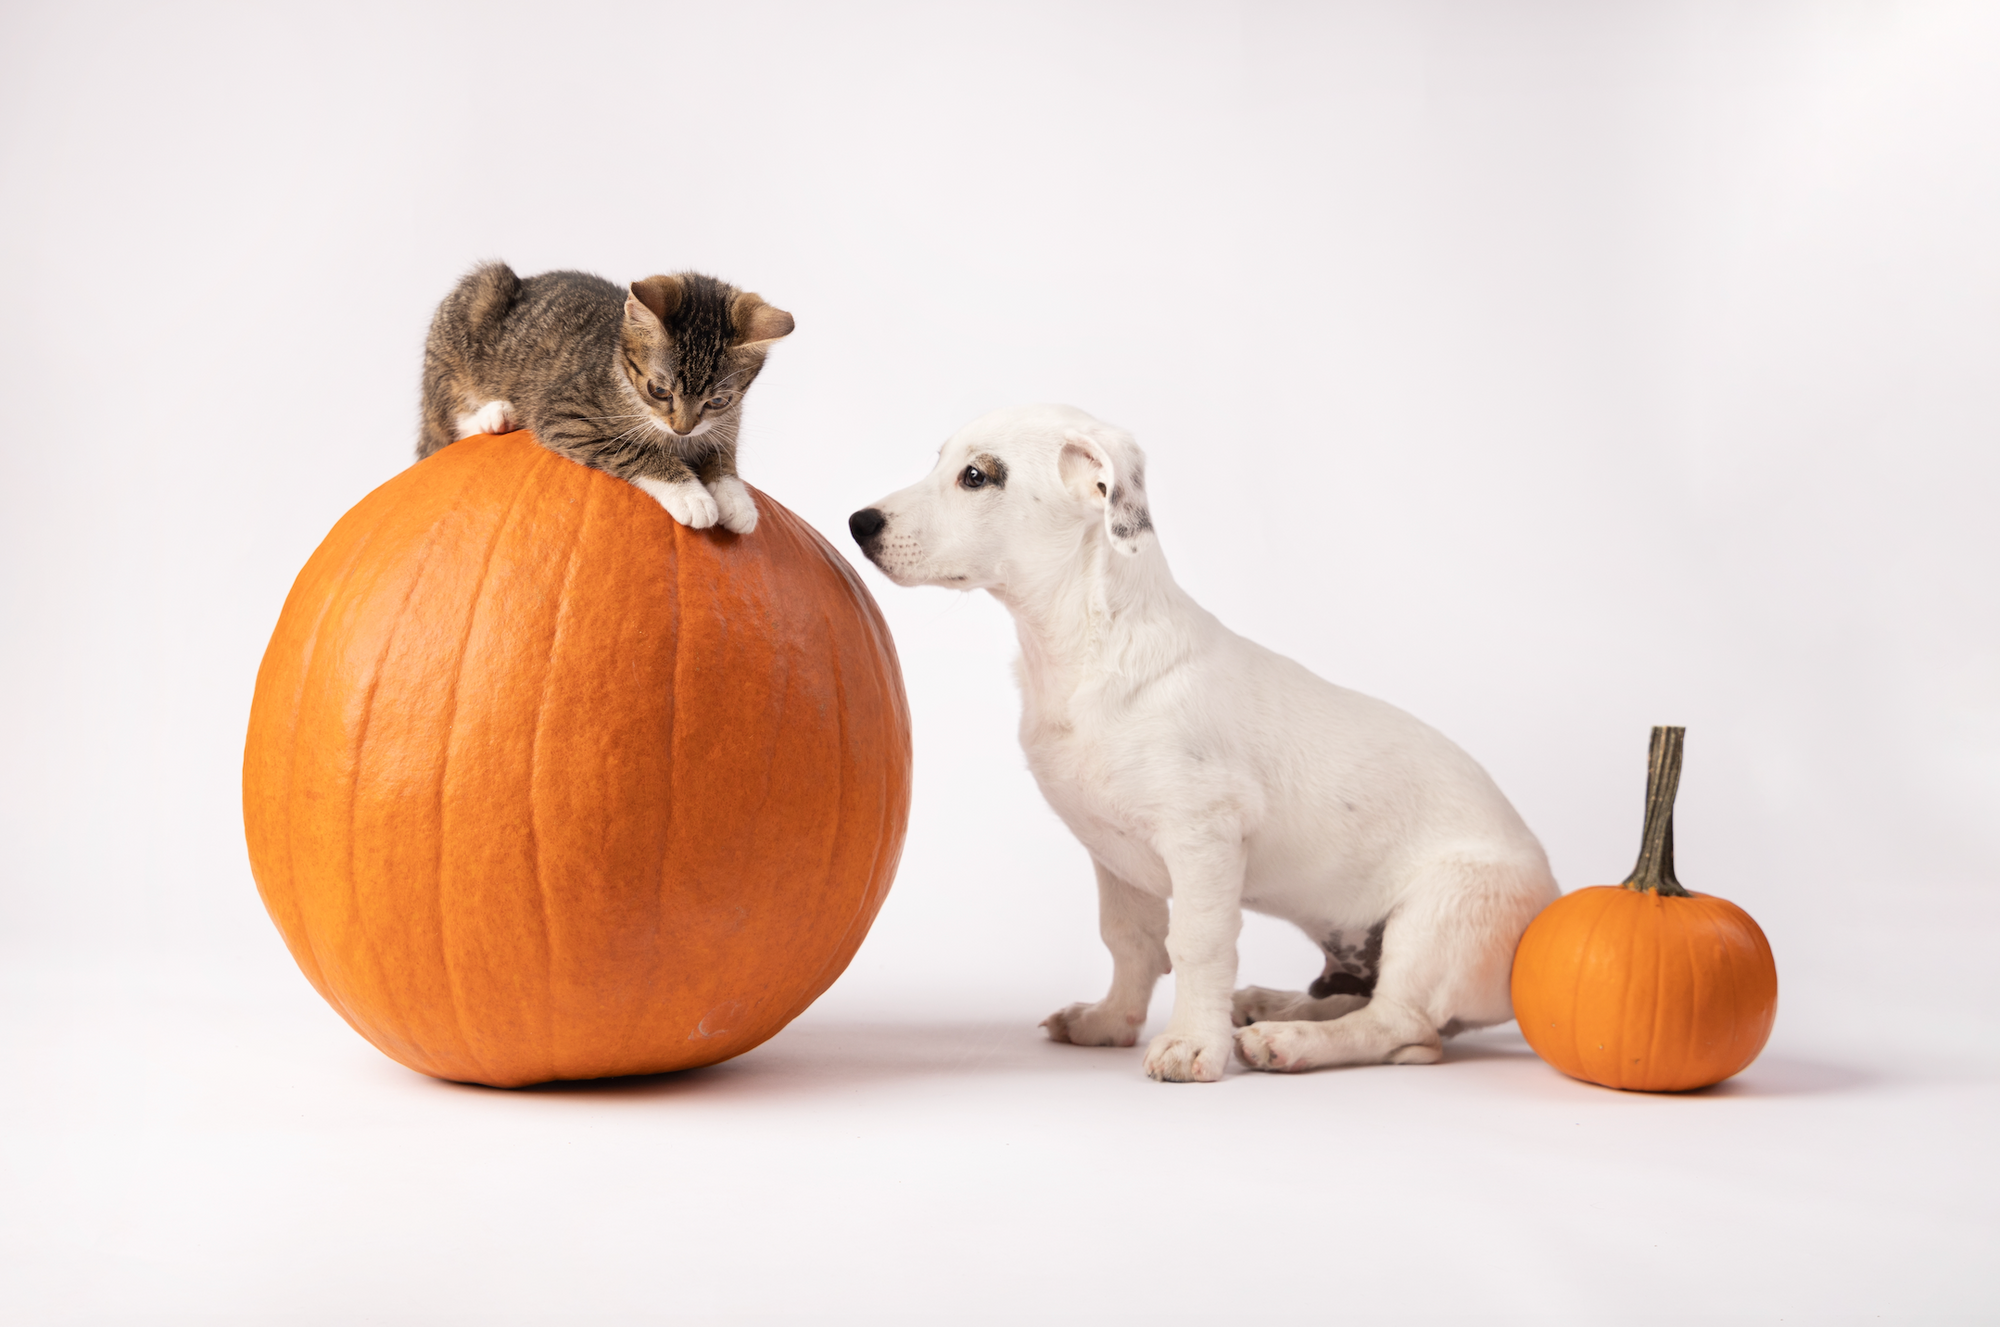 A cat and a dog with a pumpkin.